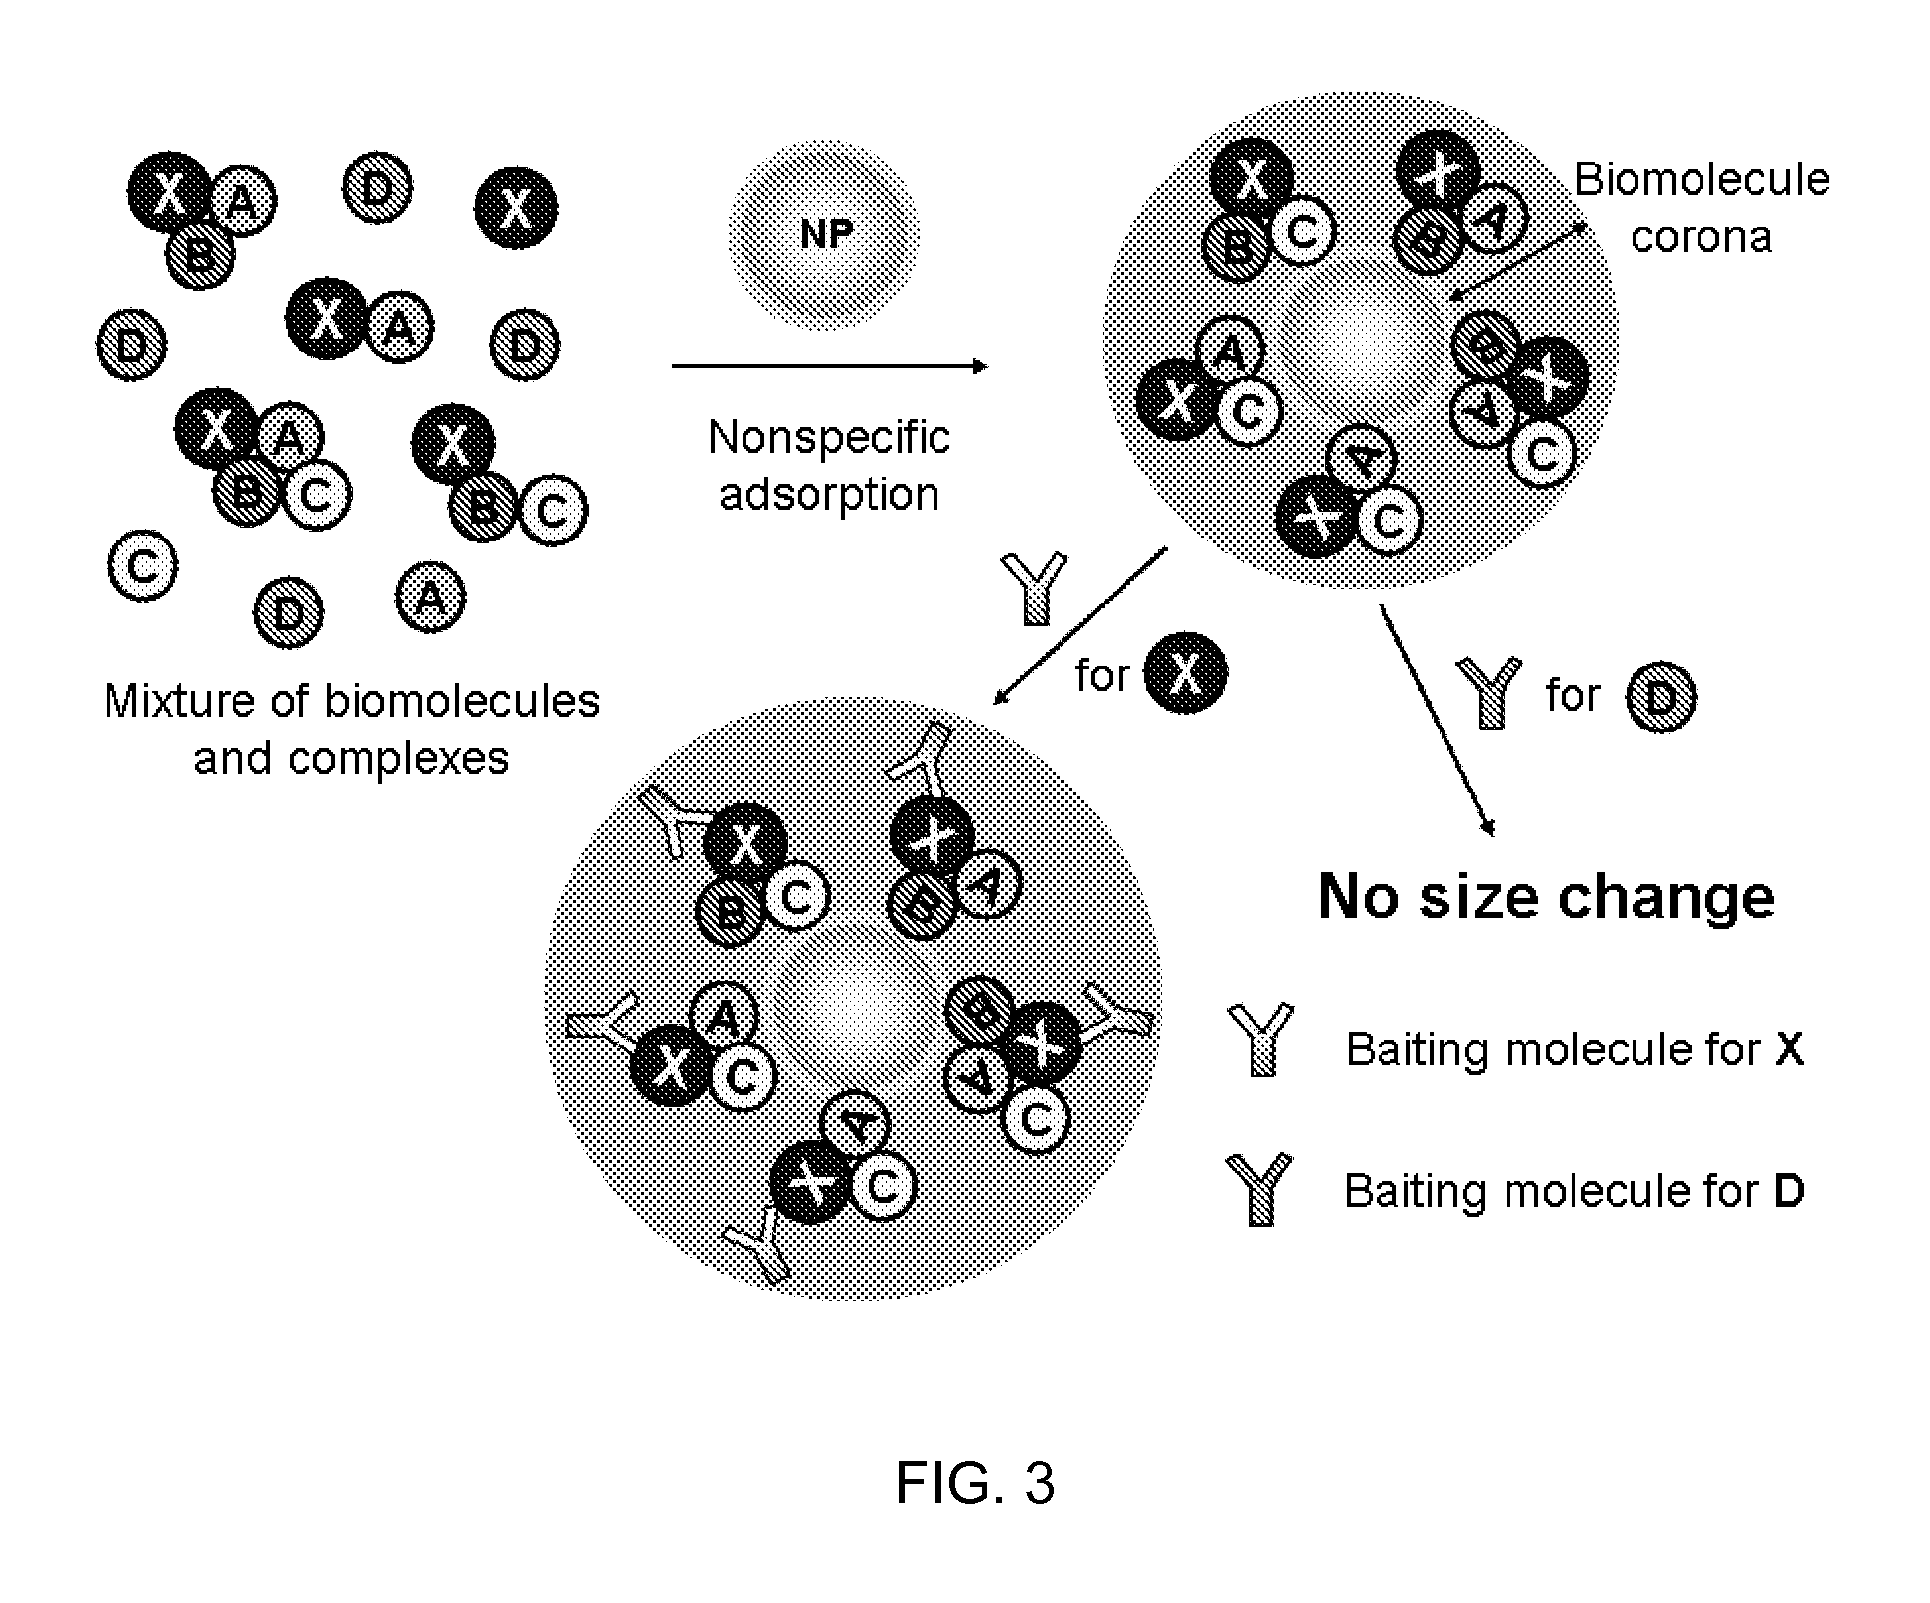 Methods for biomolecule and biomolecule complex (BMC) detection and analysis and the use of such for research and medical diagnosis